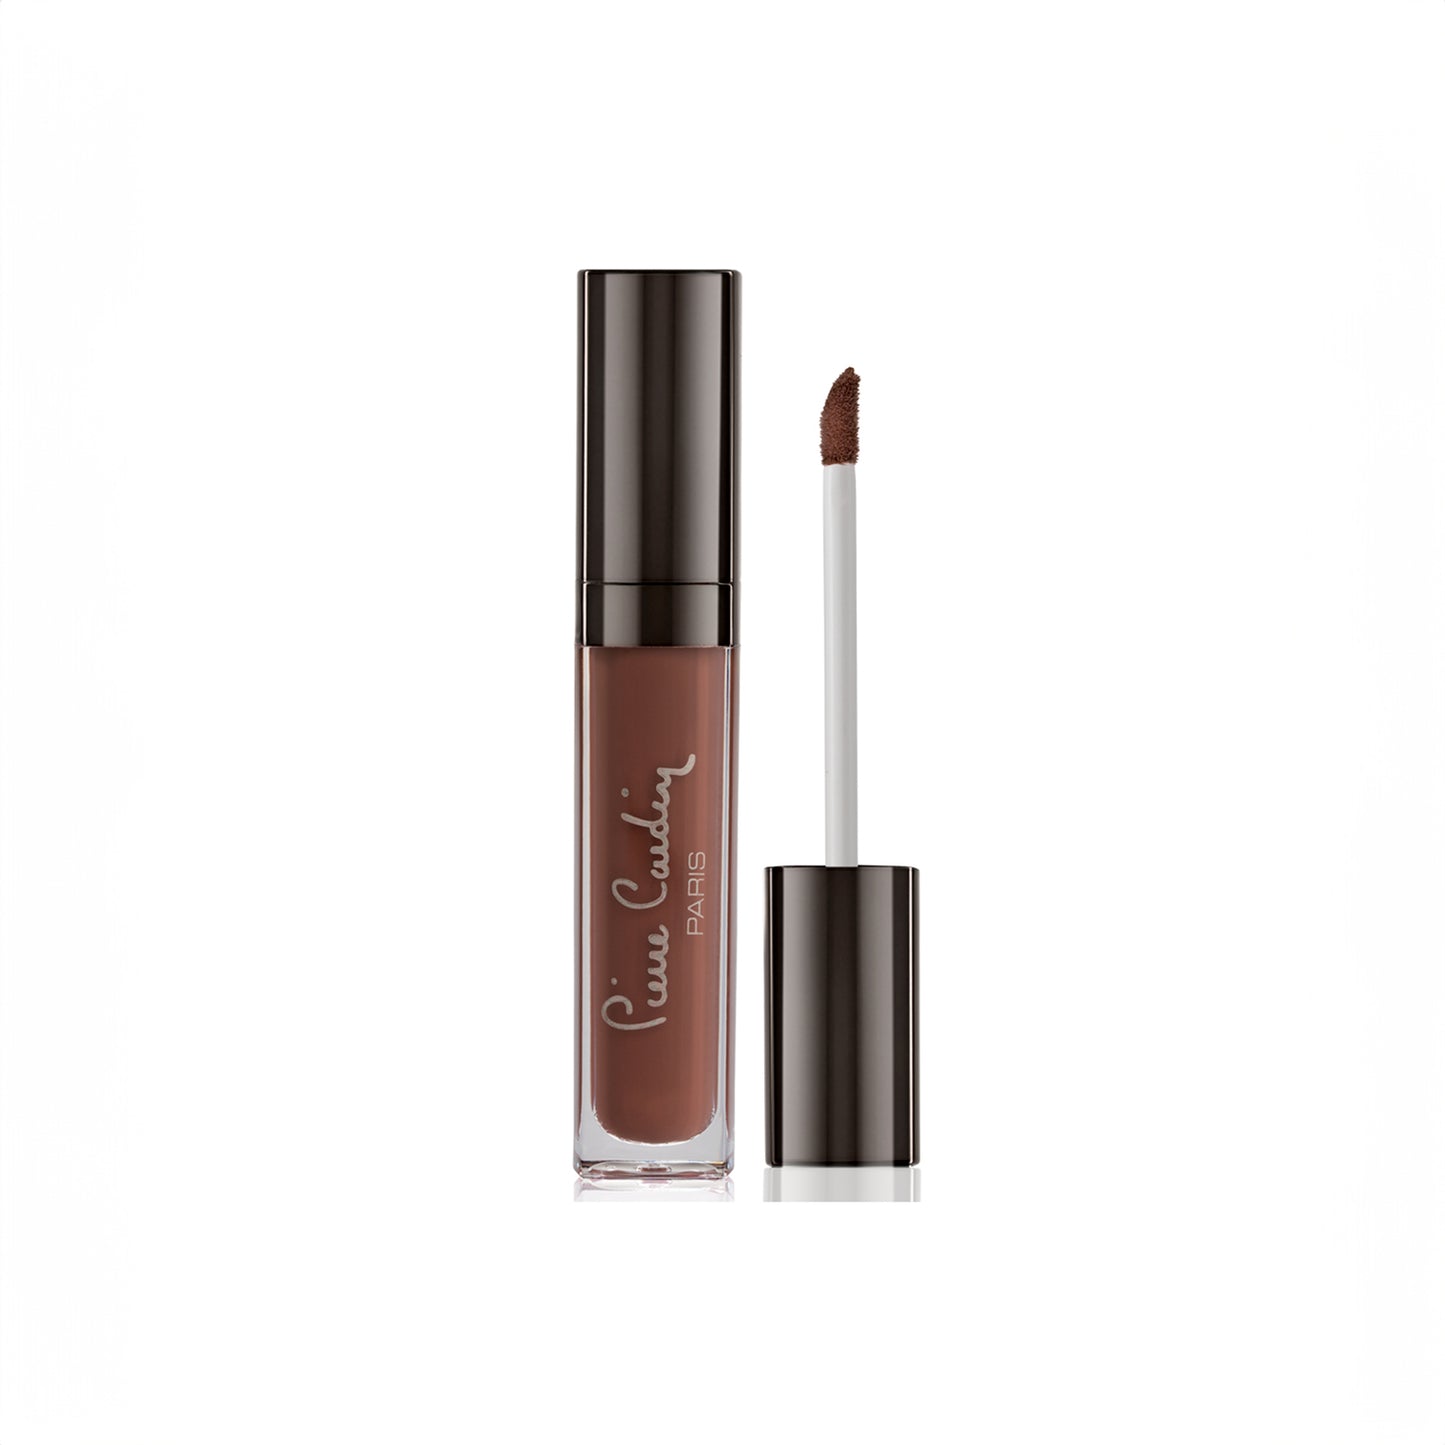 Pierre Cardin Photoflash Lipgloss – Glow Color Edition Toffee Nut 145 - 9 ml